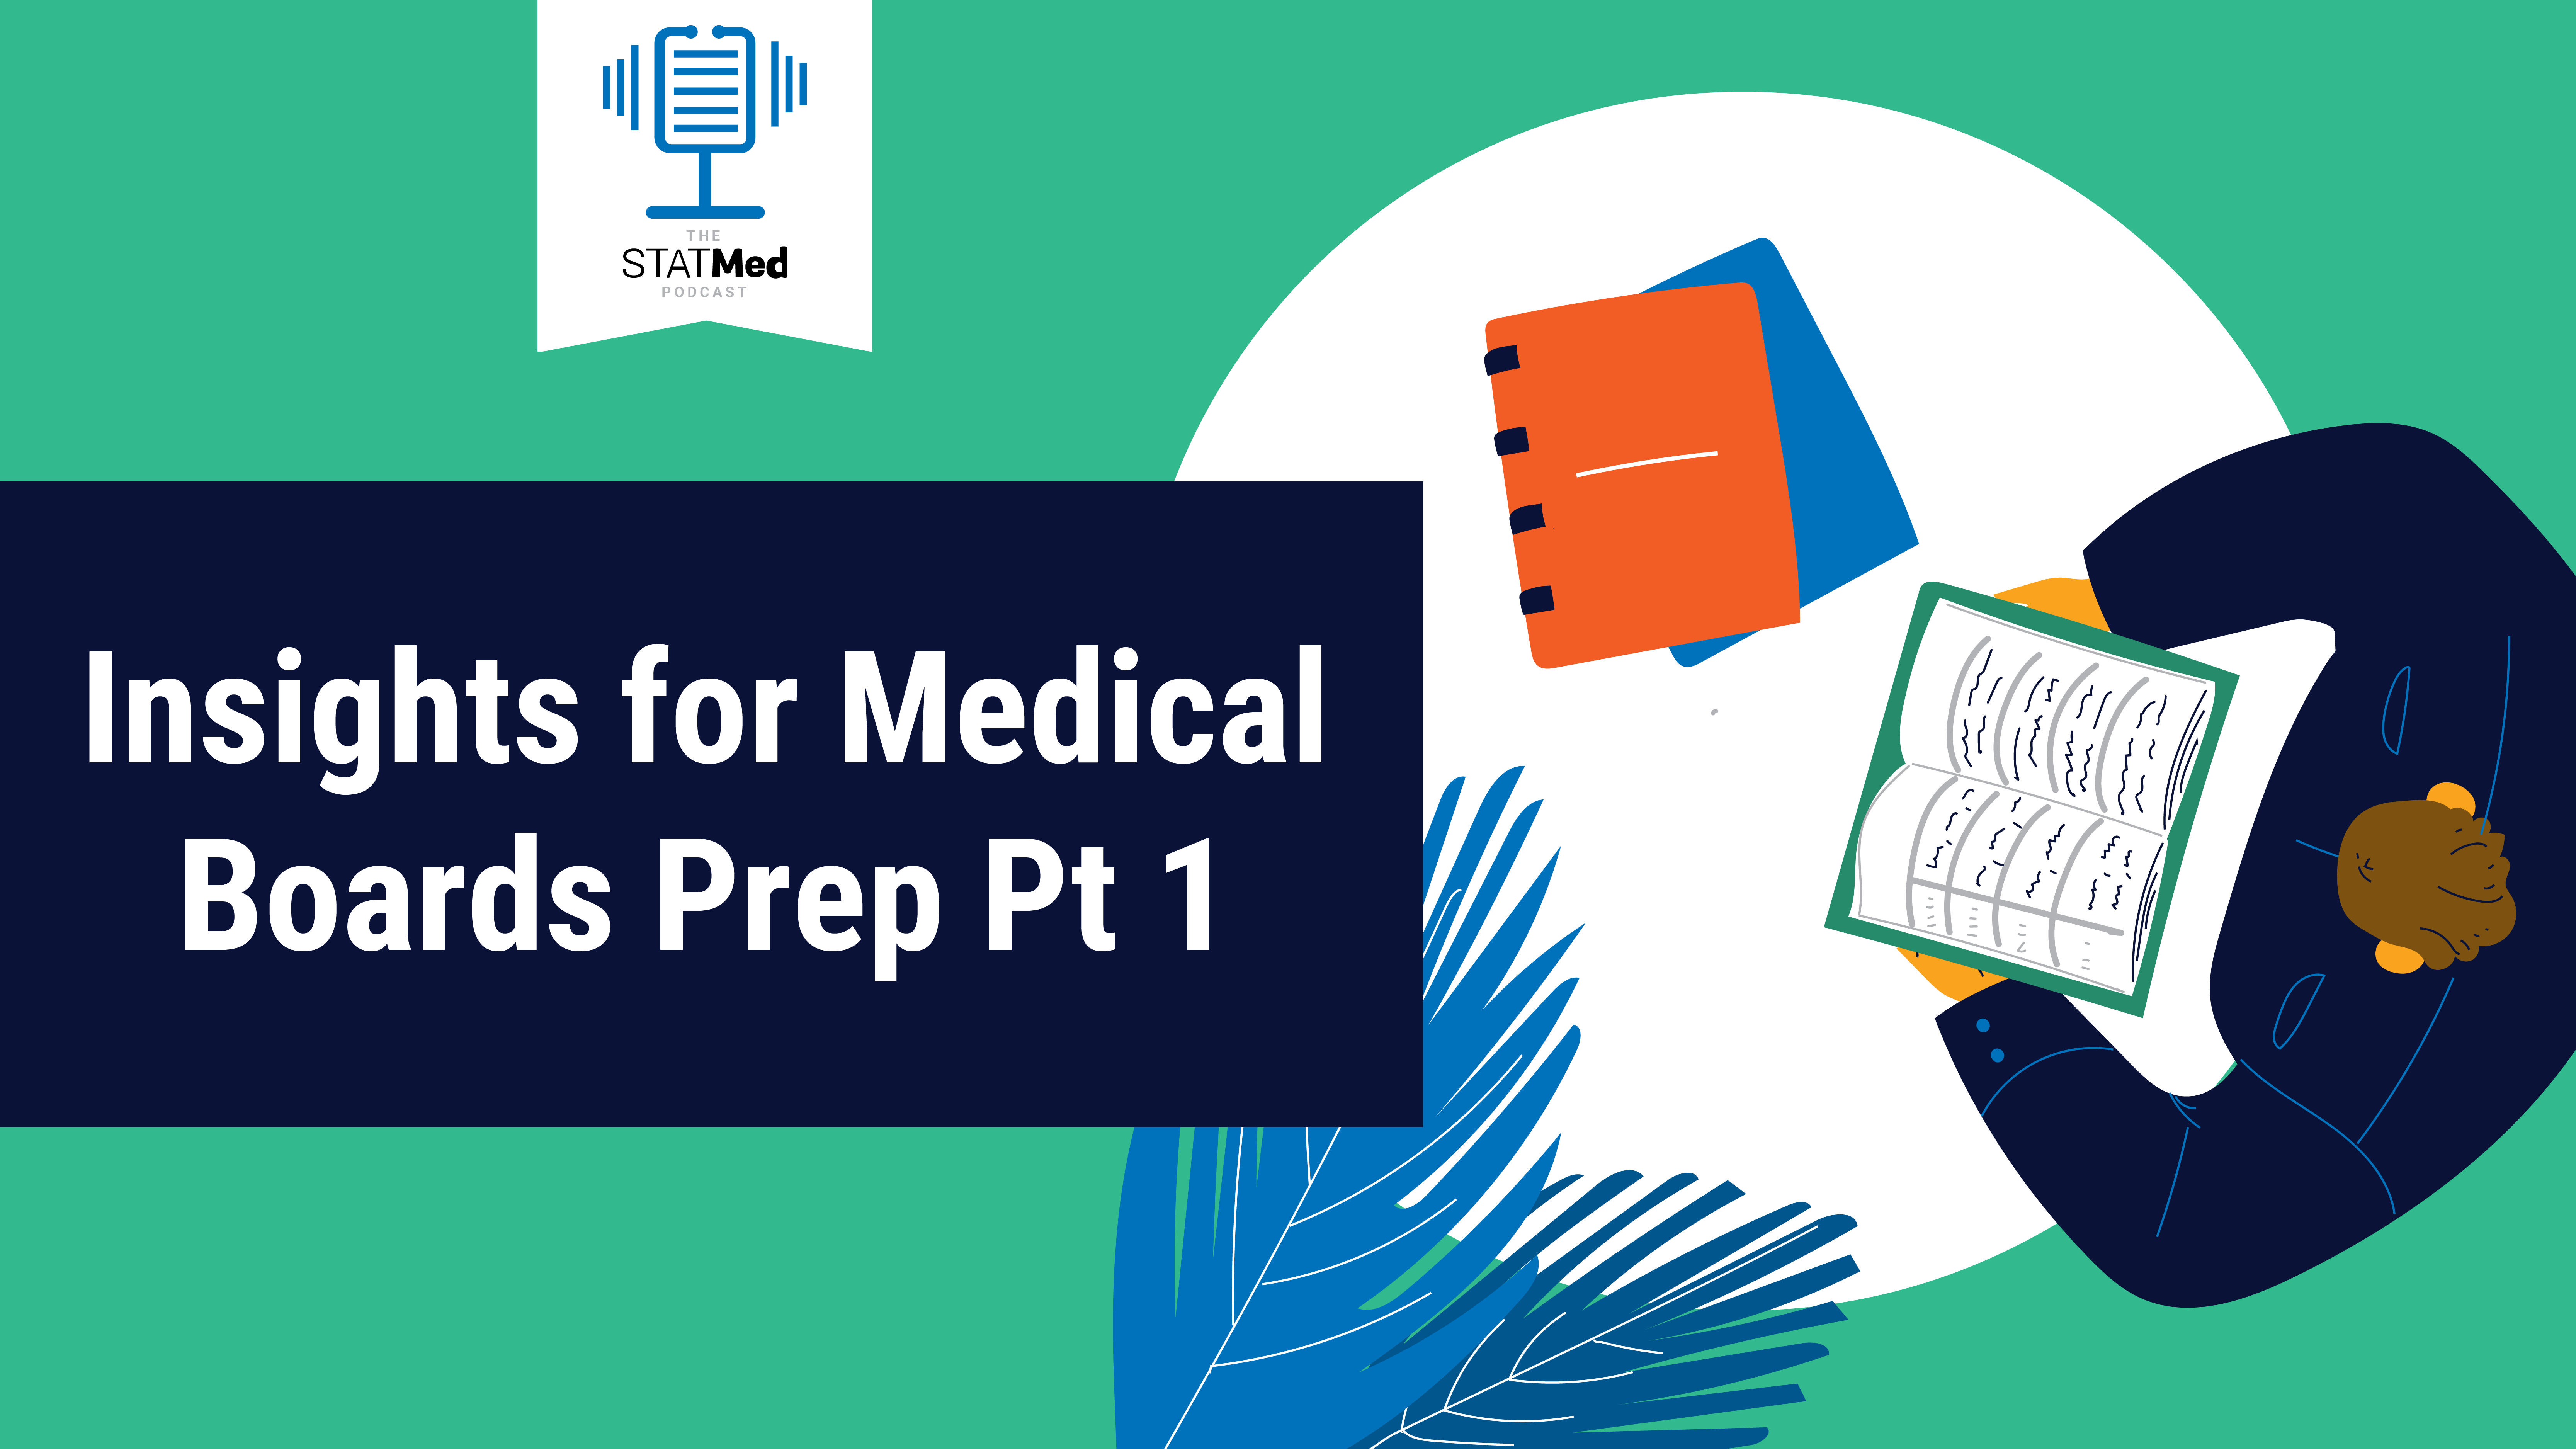 Featured image for “On the STATMed Podcast: Insights for Medical Boards Prep Pt 1”